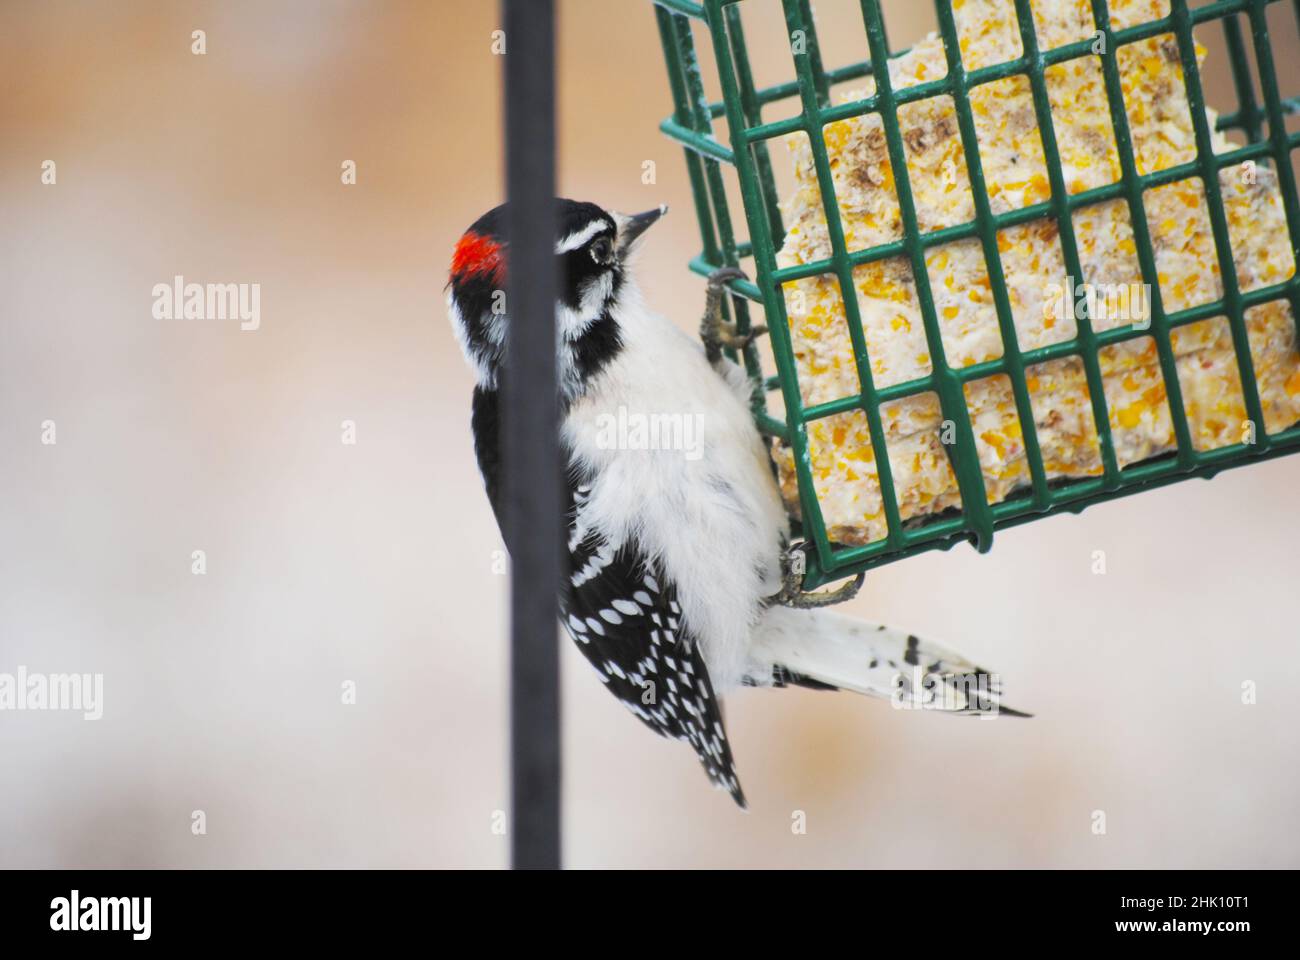 A Downy Woodpecker Feeding From the Side of a Suet Feeder Stock Photo